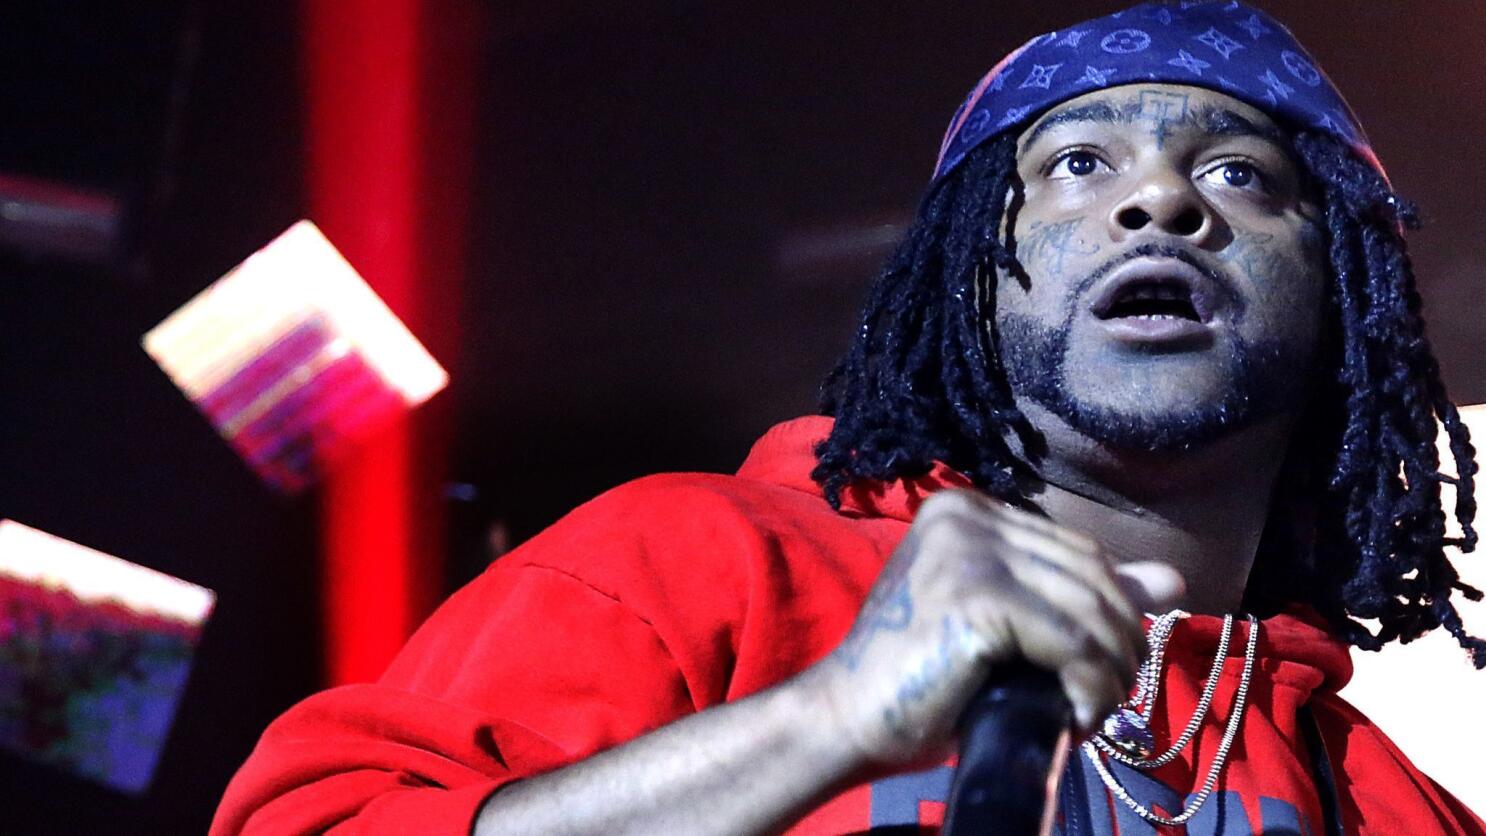 Review: A farewell concert for 03 Greedo? While the courts decide 